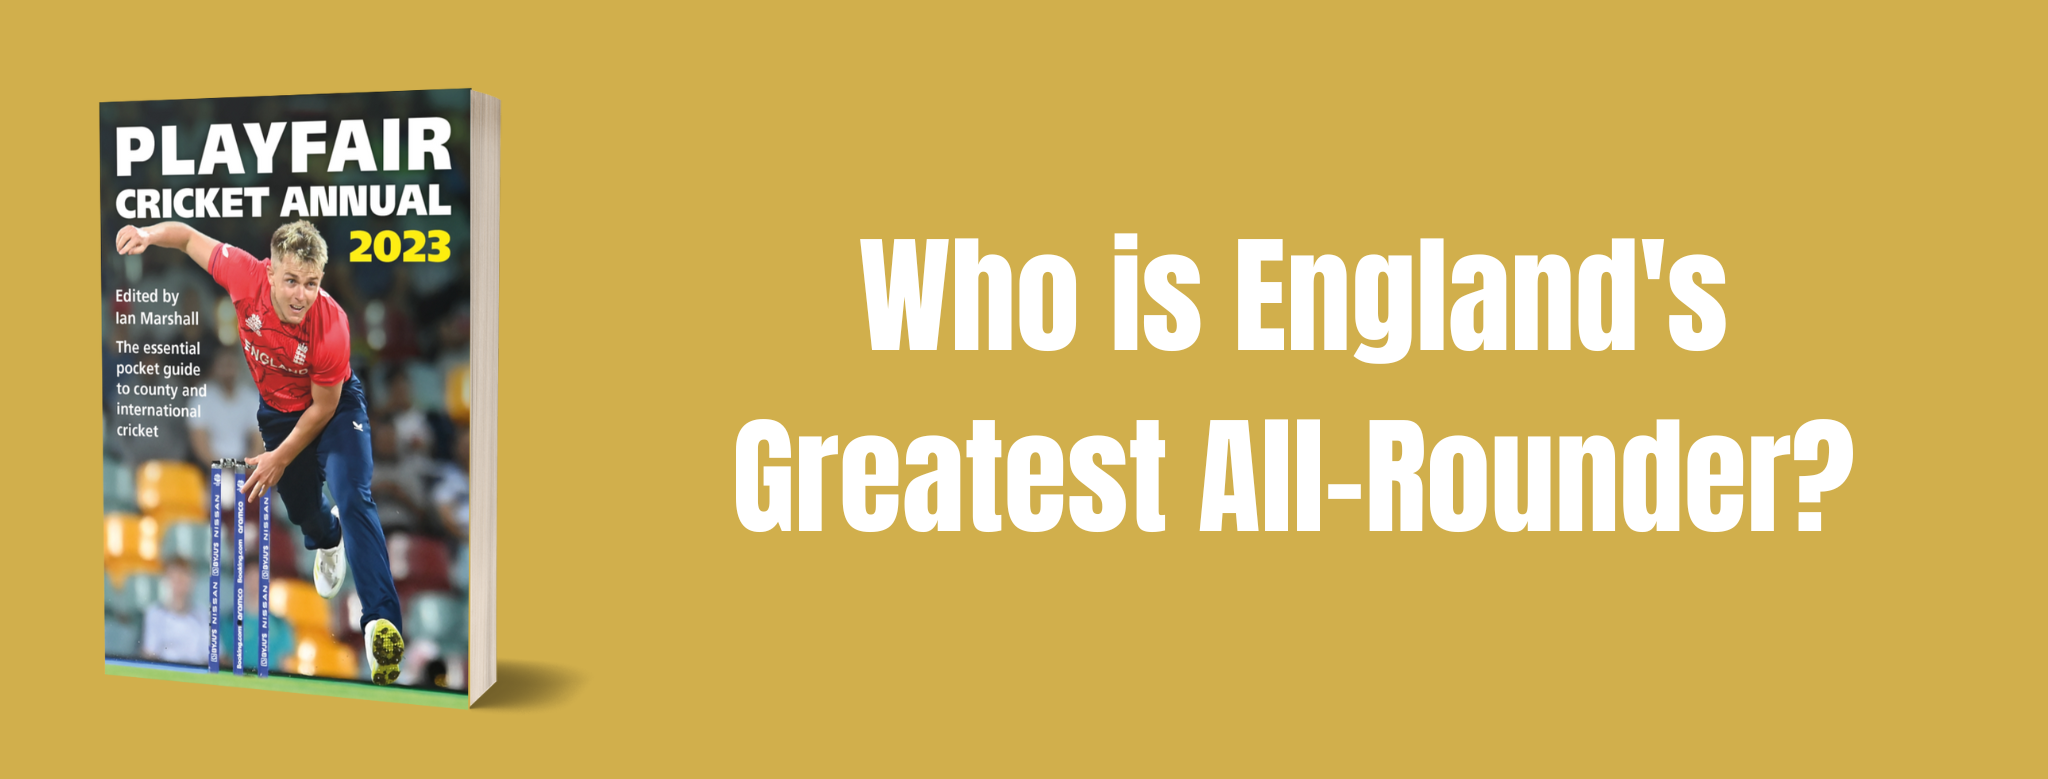 Who Is England's Greatest All-Rounder?